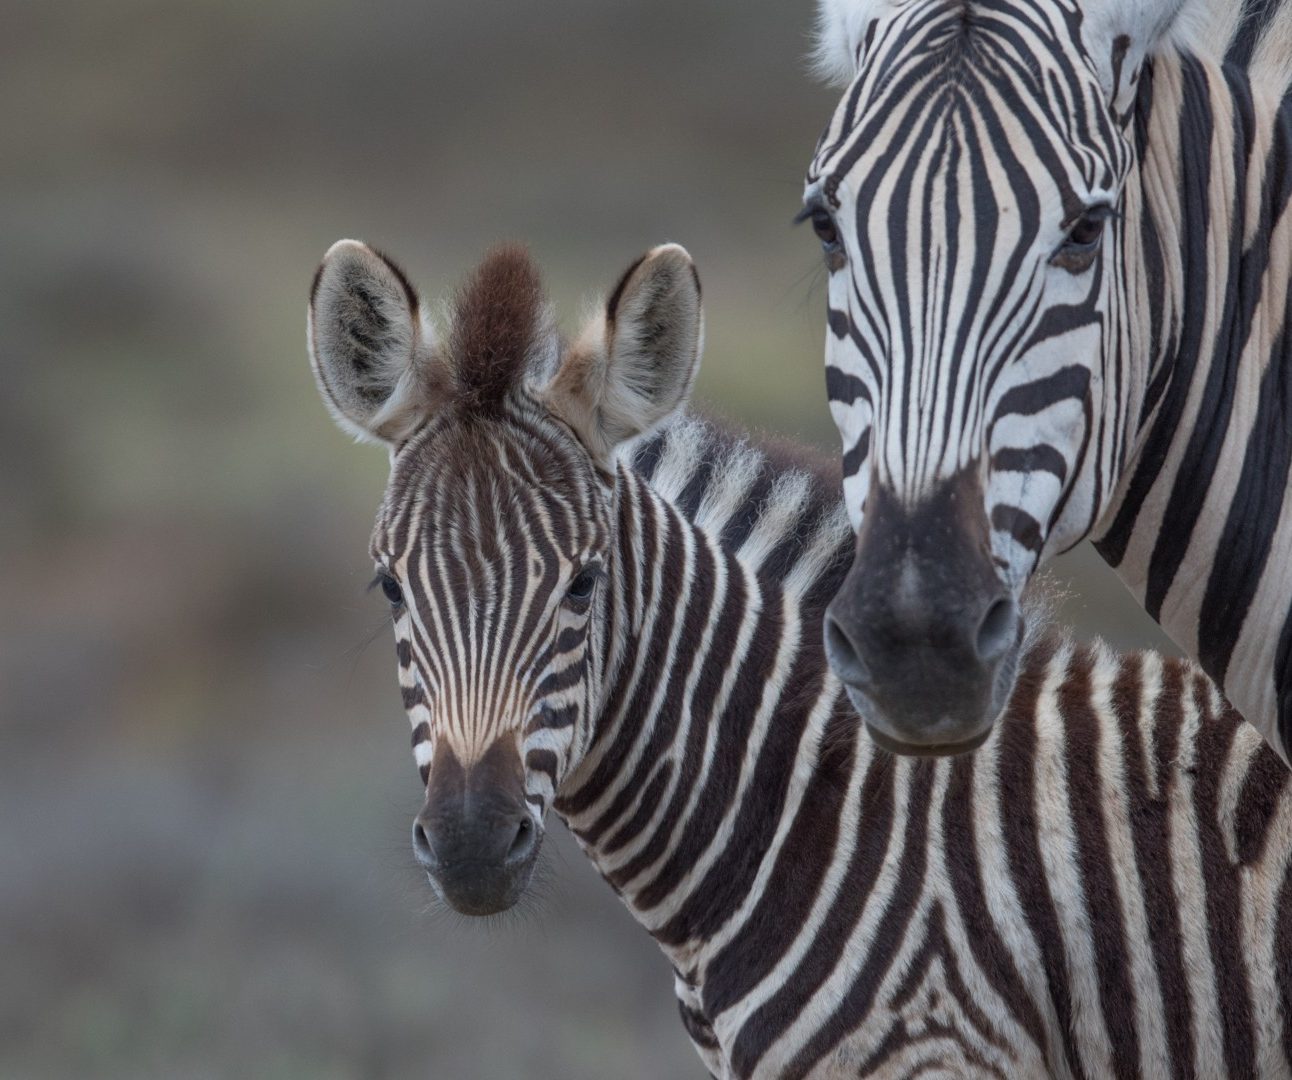 Two wild zebras looking directly into the camera